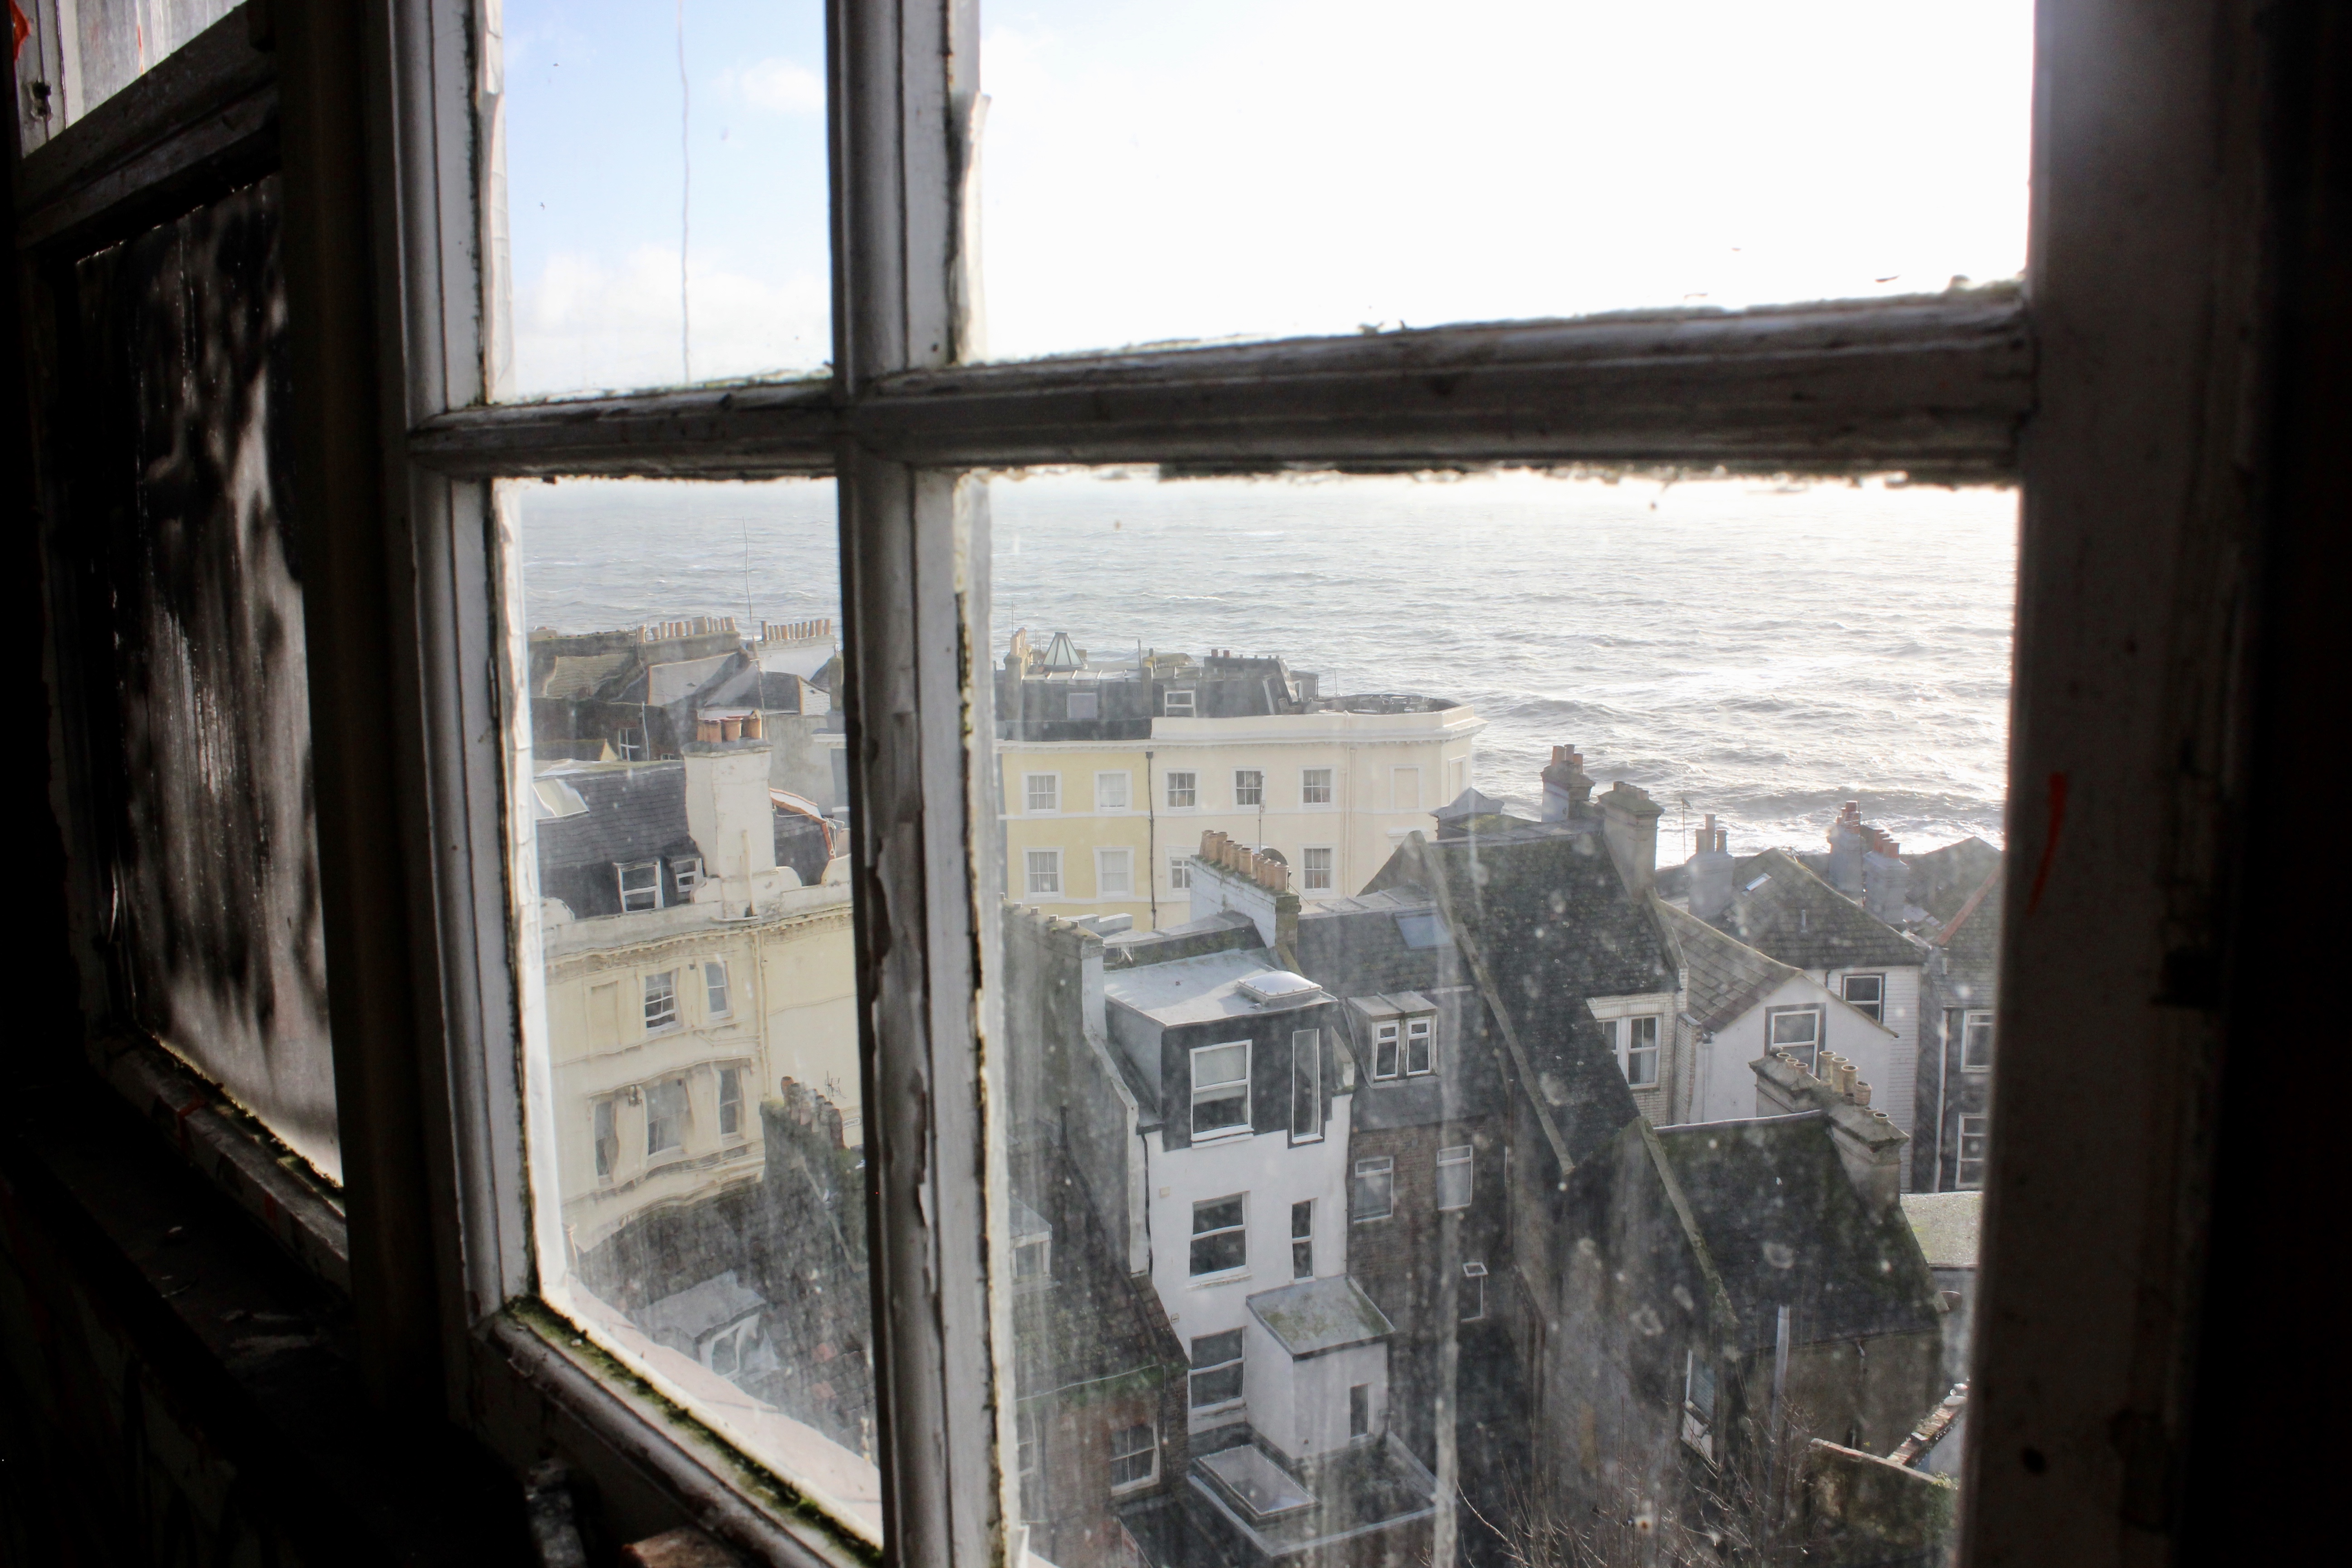 Looking out of a window at Hastings, the sea in the distance